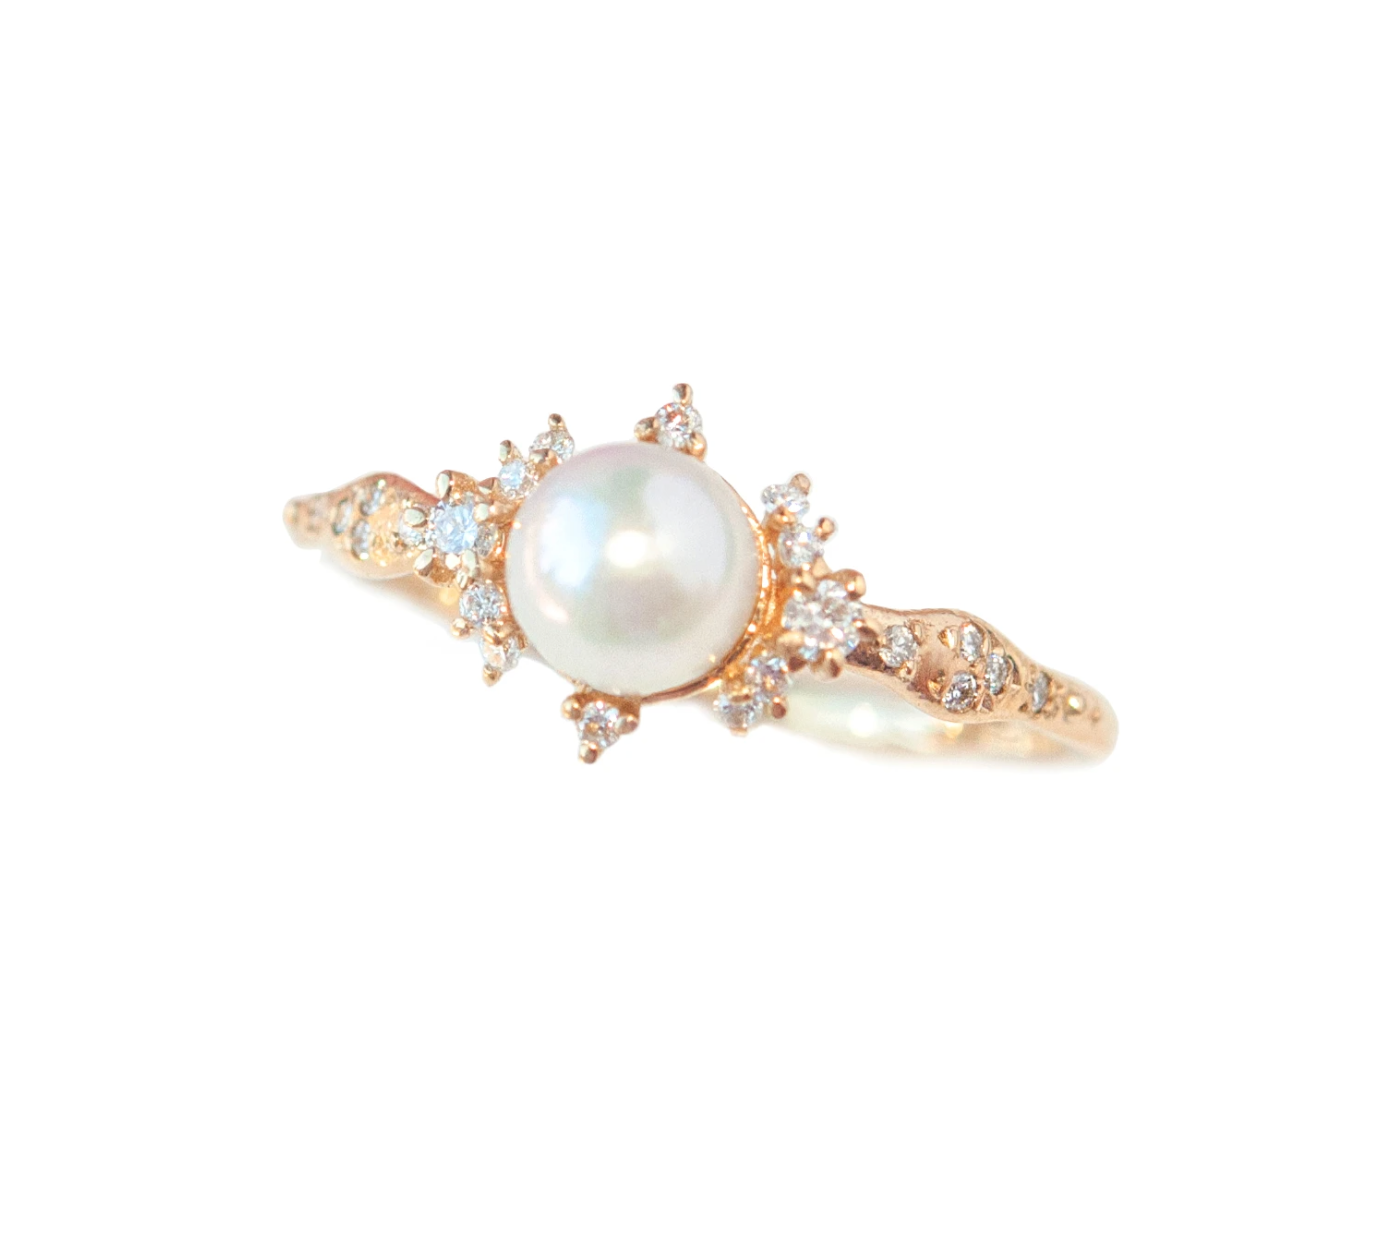 Pearl and diamond ring close up on white background.